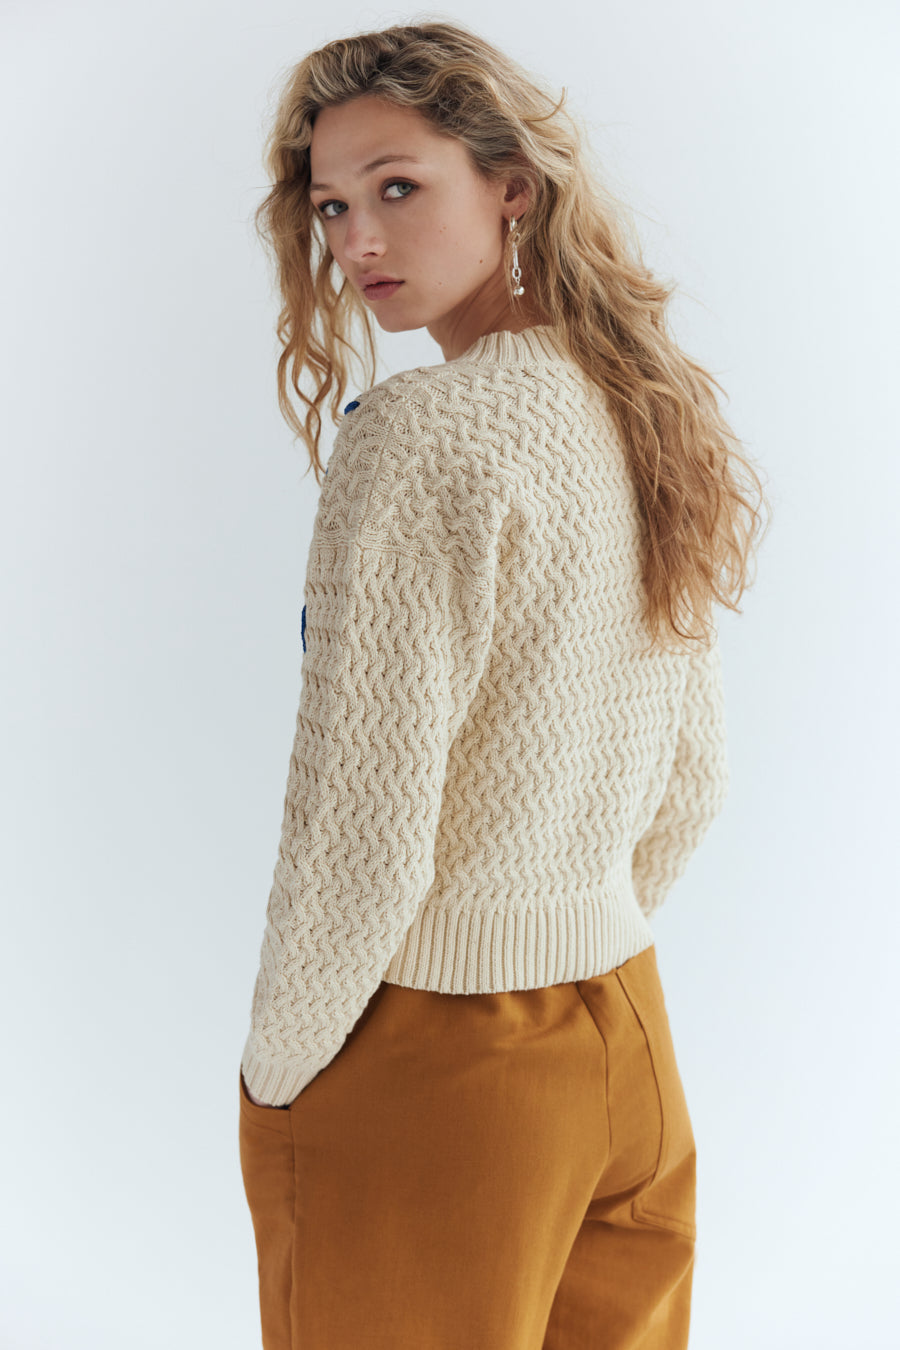 Eve Gravel Fall 23/24 - Greenland Sweater in Ivory